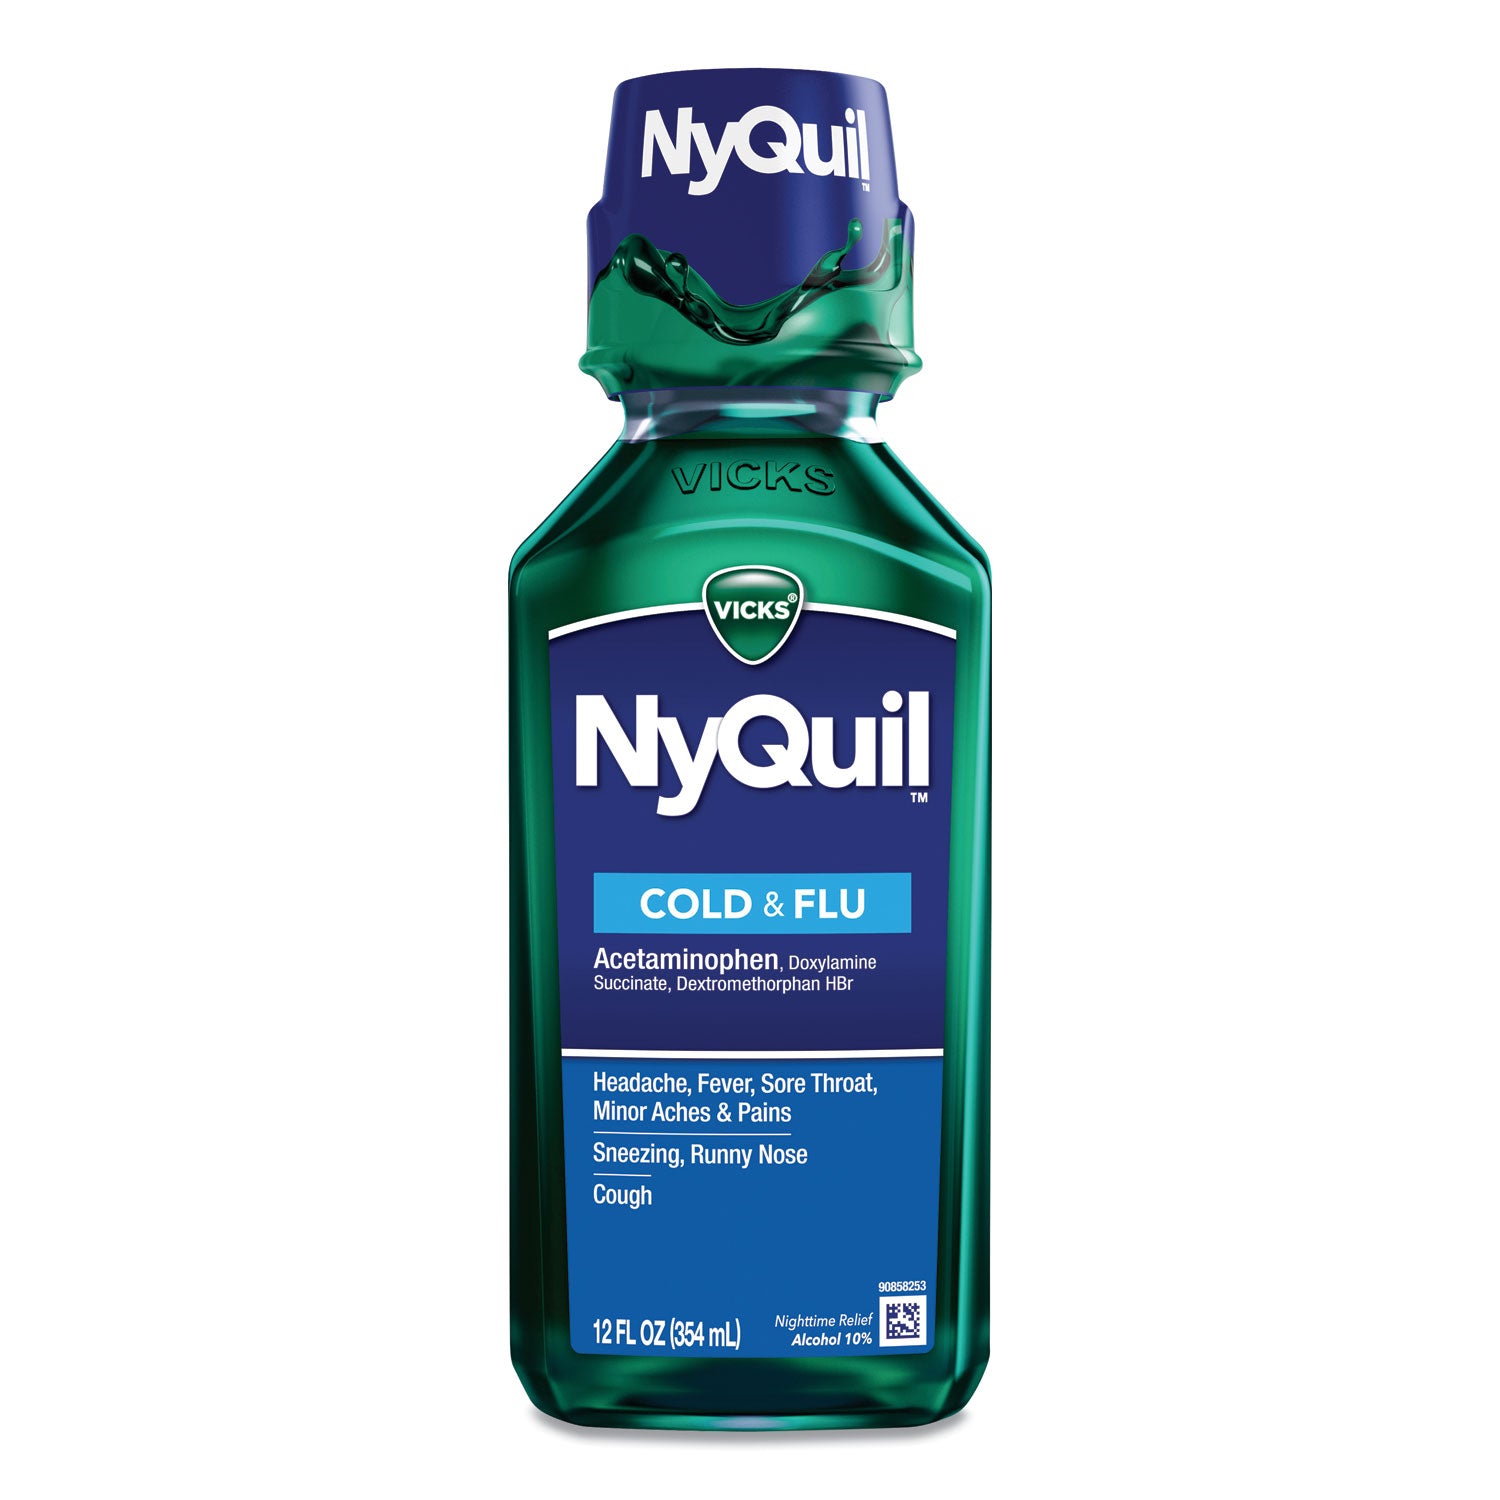 nyquil-cold-and-flu-nighttime-liquid-12-oz-bottle_pgc01426ea - 1